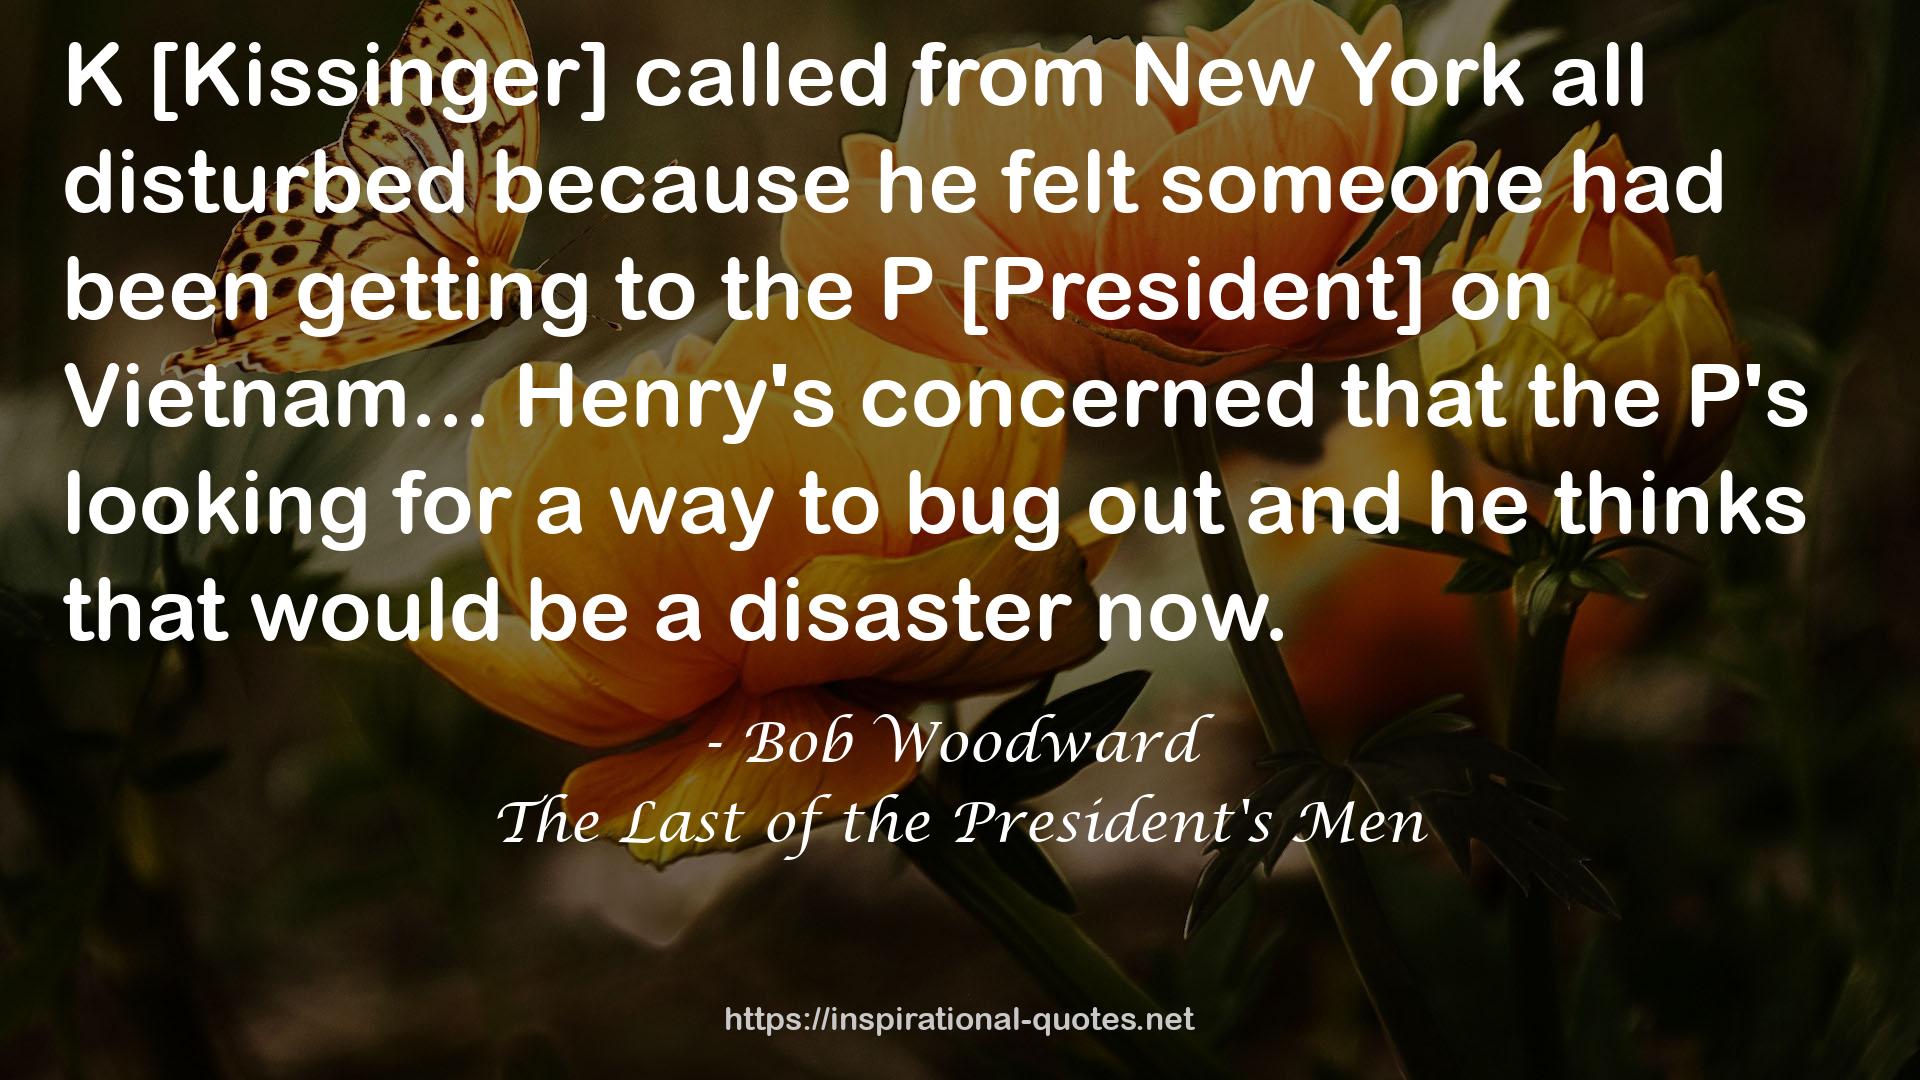 The Last of the President's Men QUOTES